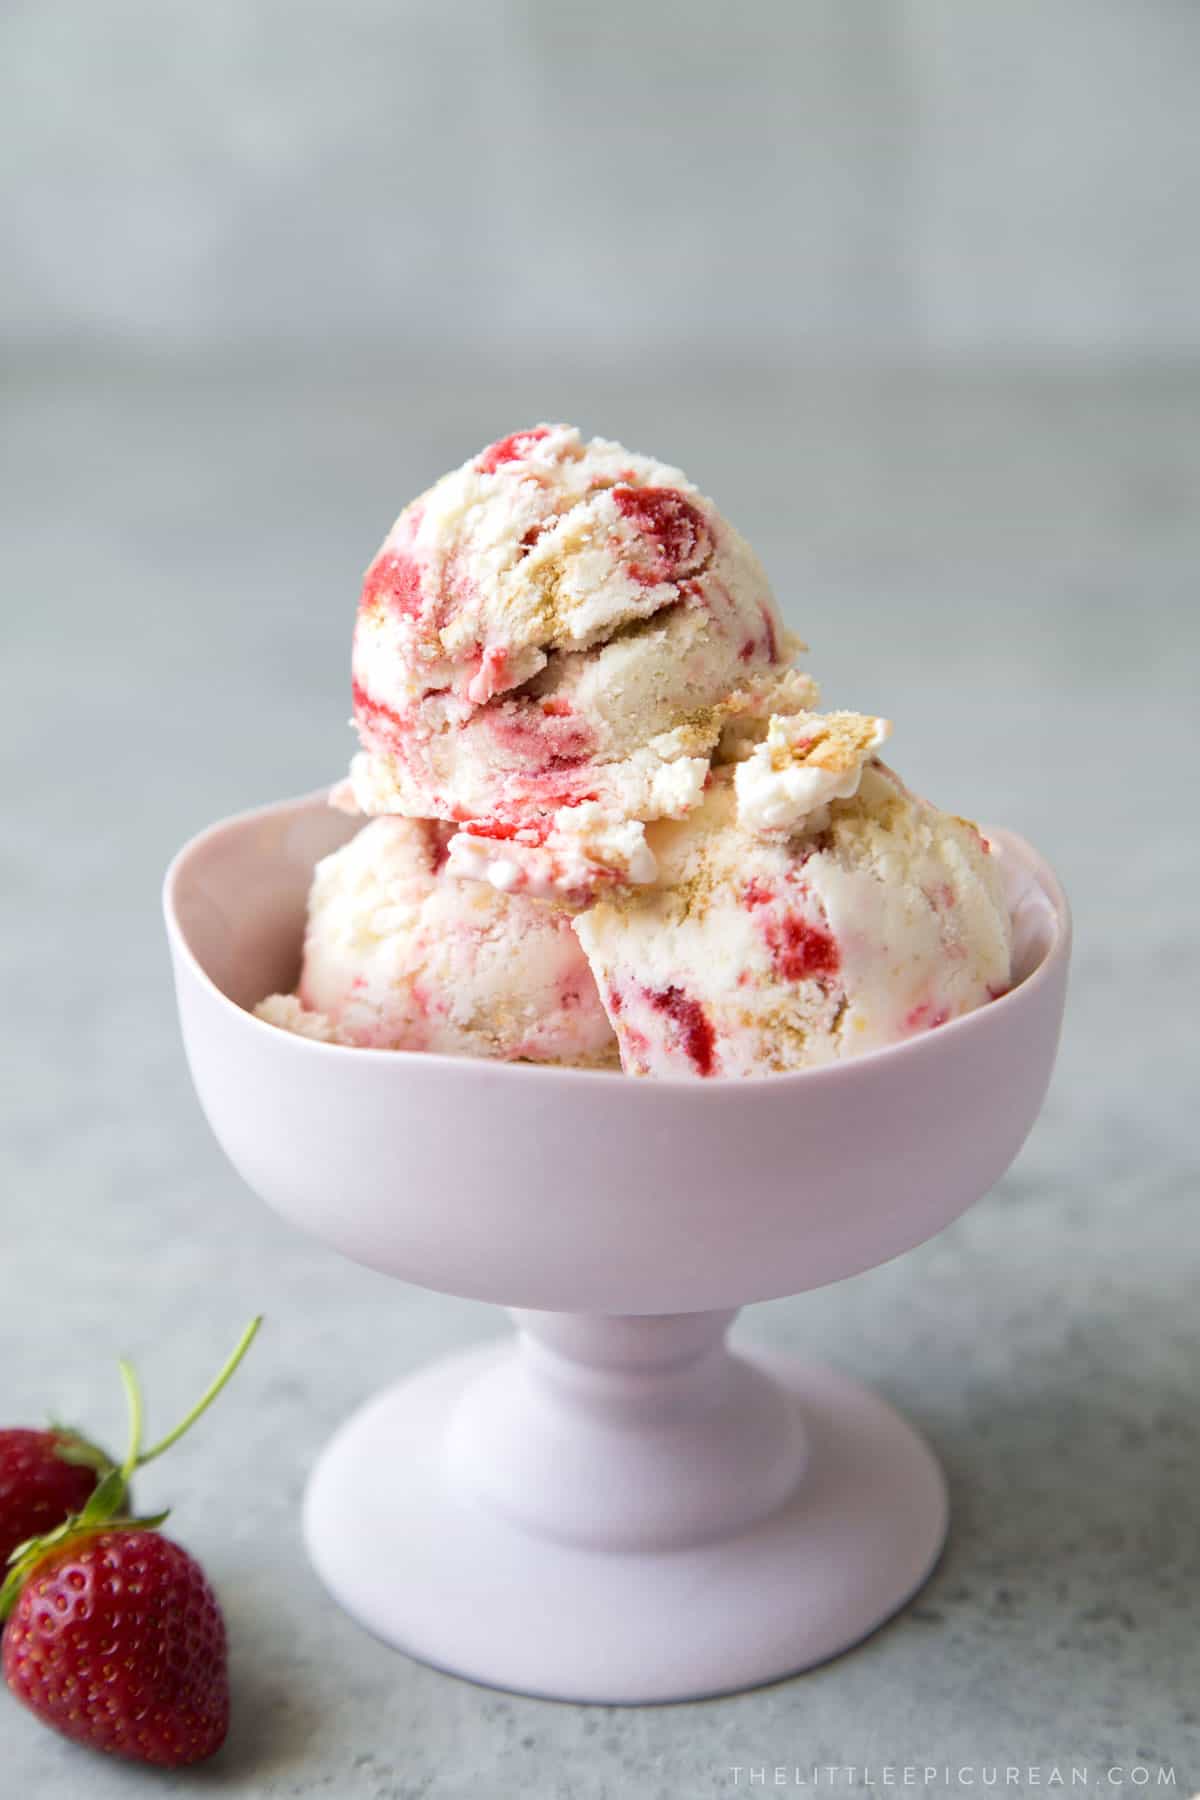 strawberry cheesecake ice cream scoops served in stemmed ice cream dish.